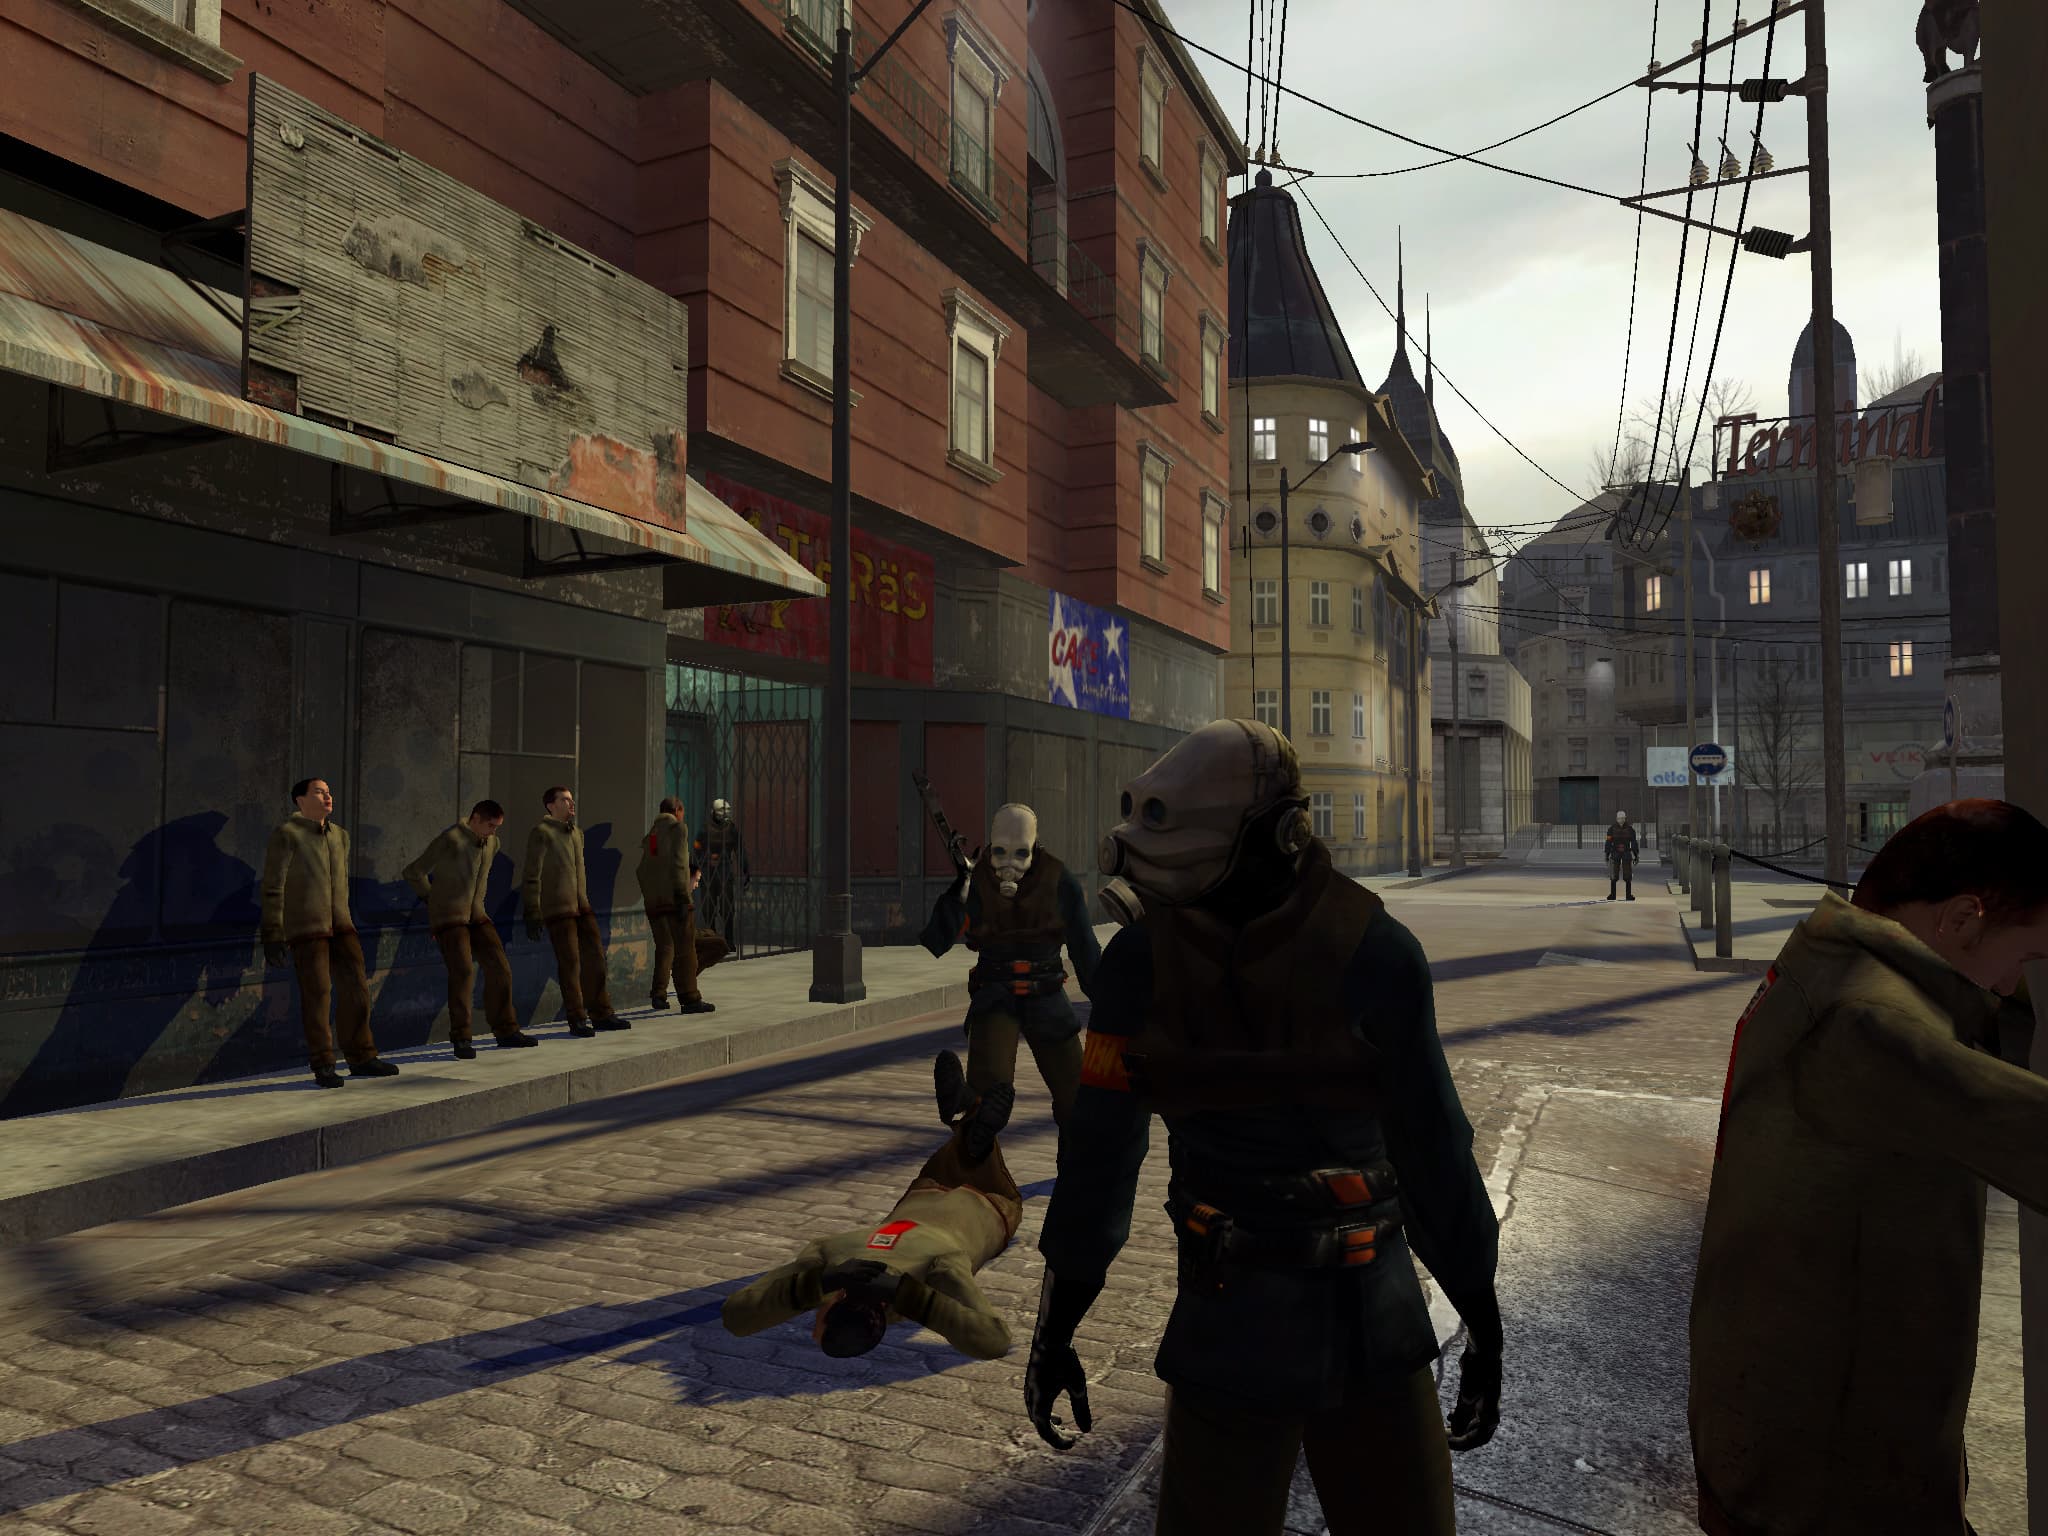 Two metro cops hold one citizen against the wall and another to the floor while four other citizens stand against a wall. An Eastern European plaza can be seen in the background, with a terminal sign above a building in the distance.